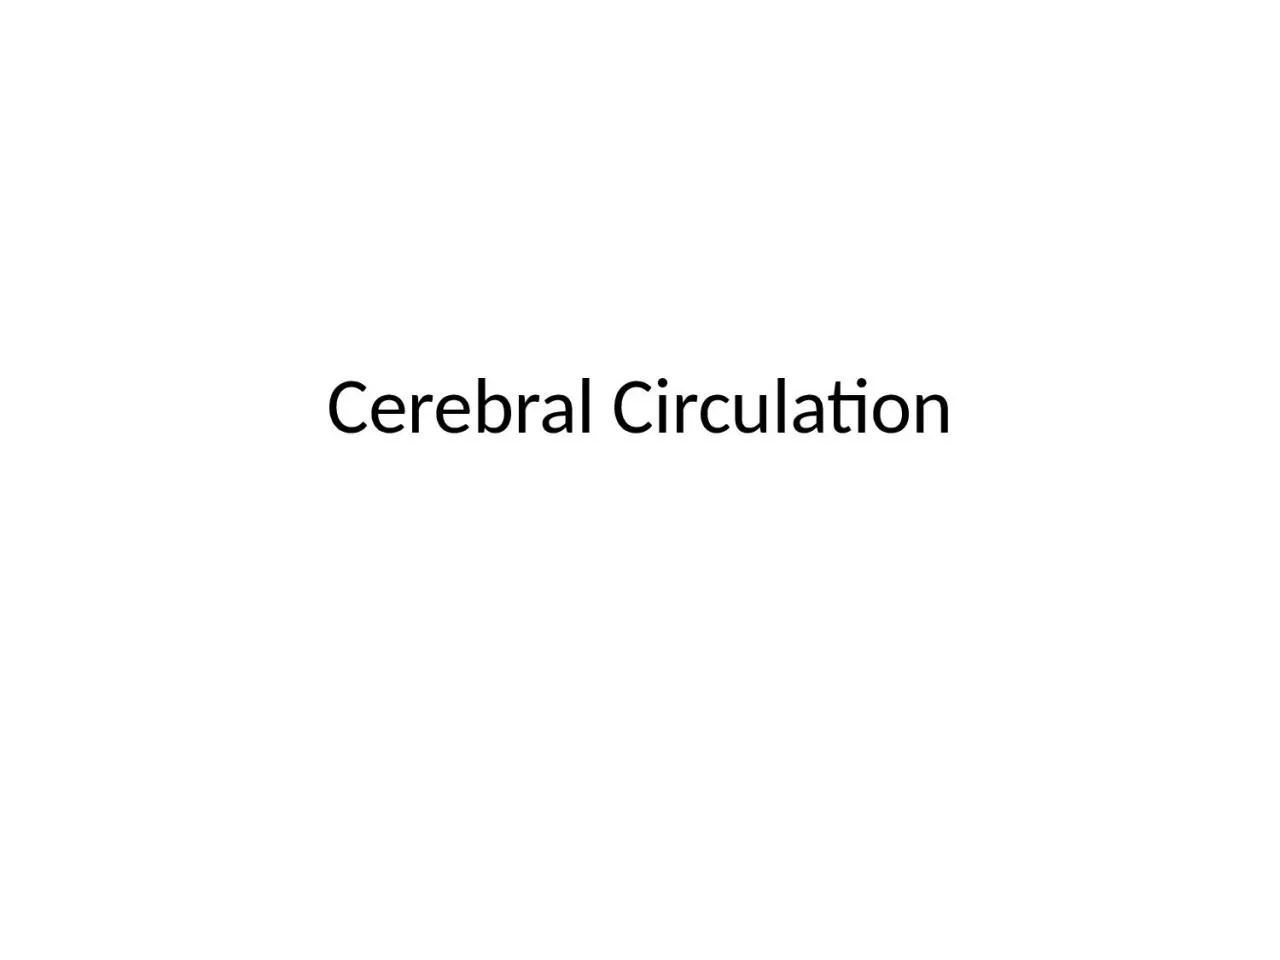 Cerebral Circulation What we will cover